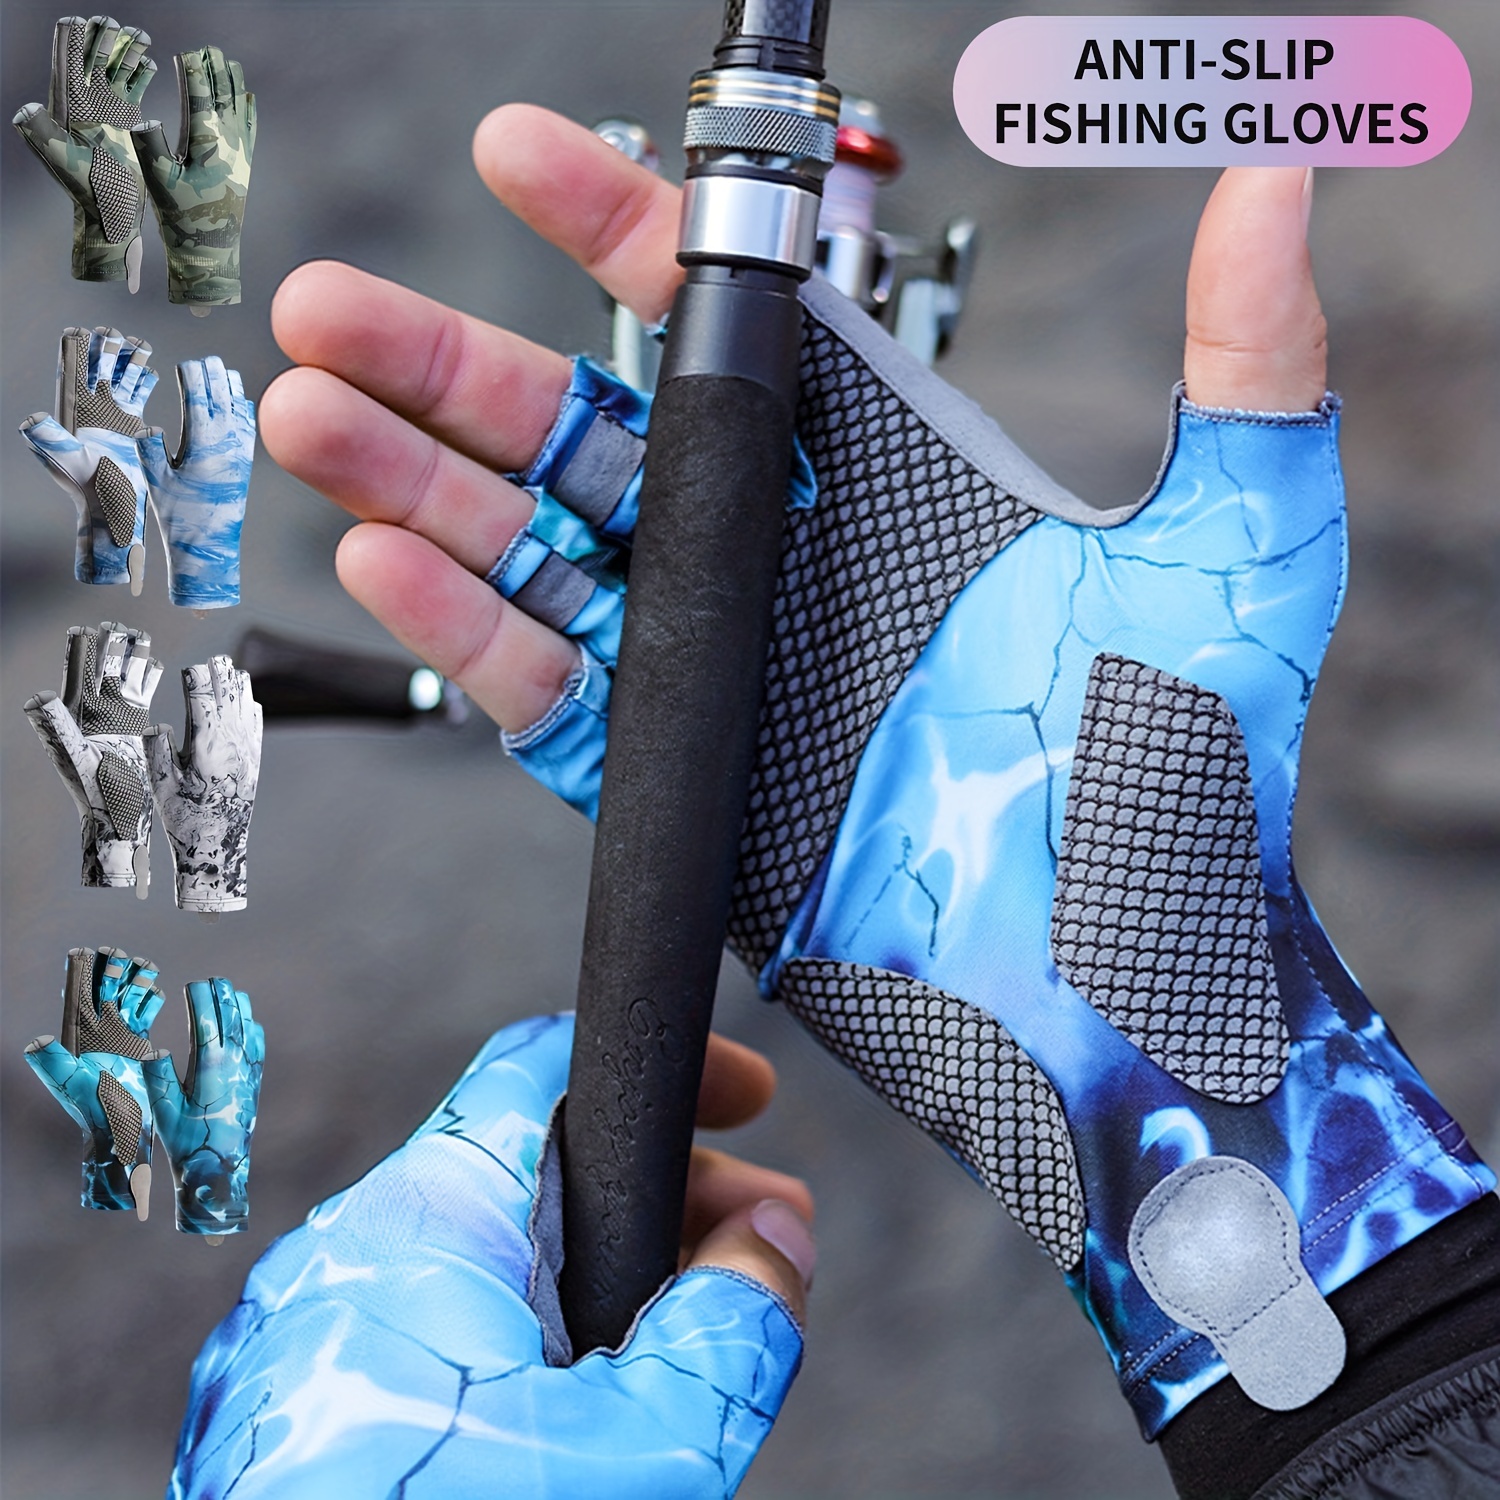  Winter Fishing Gloves Full Finger/Fingerless Gloves,Touchscreen  Water Resistant Warm Fishing Gloves for Cold Weather,JoyFishing Pro  Anti-Slip Camo Glove for Ice Fishing,Photography (Camo A, Medium) : Sports  & Outdoors